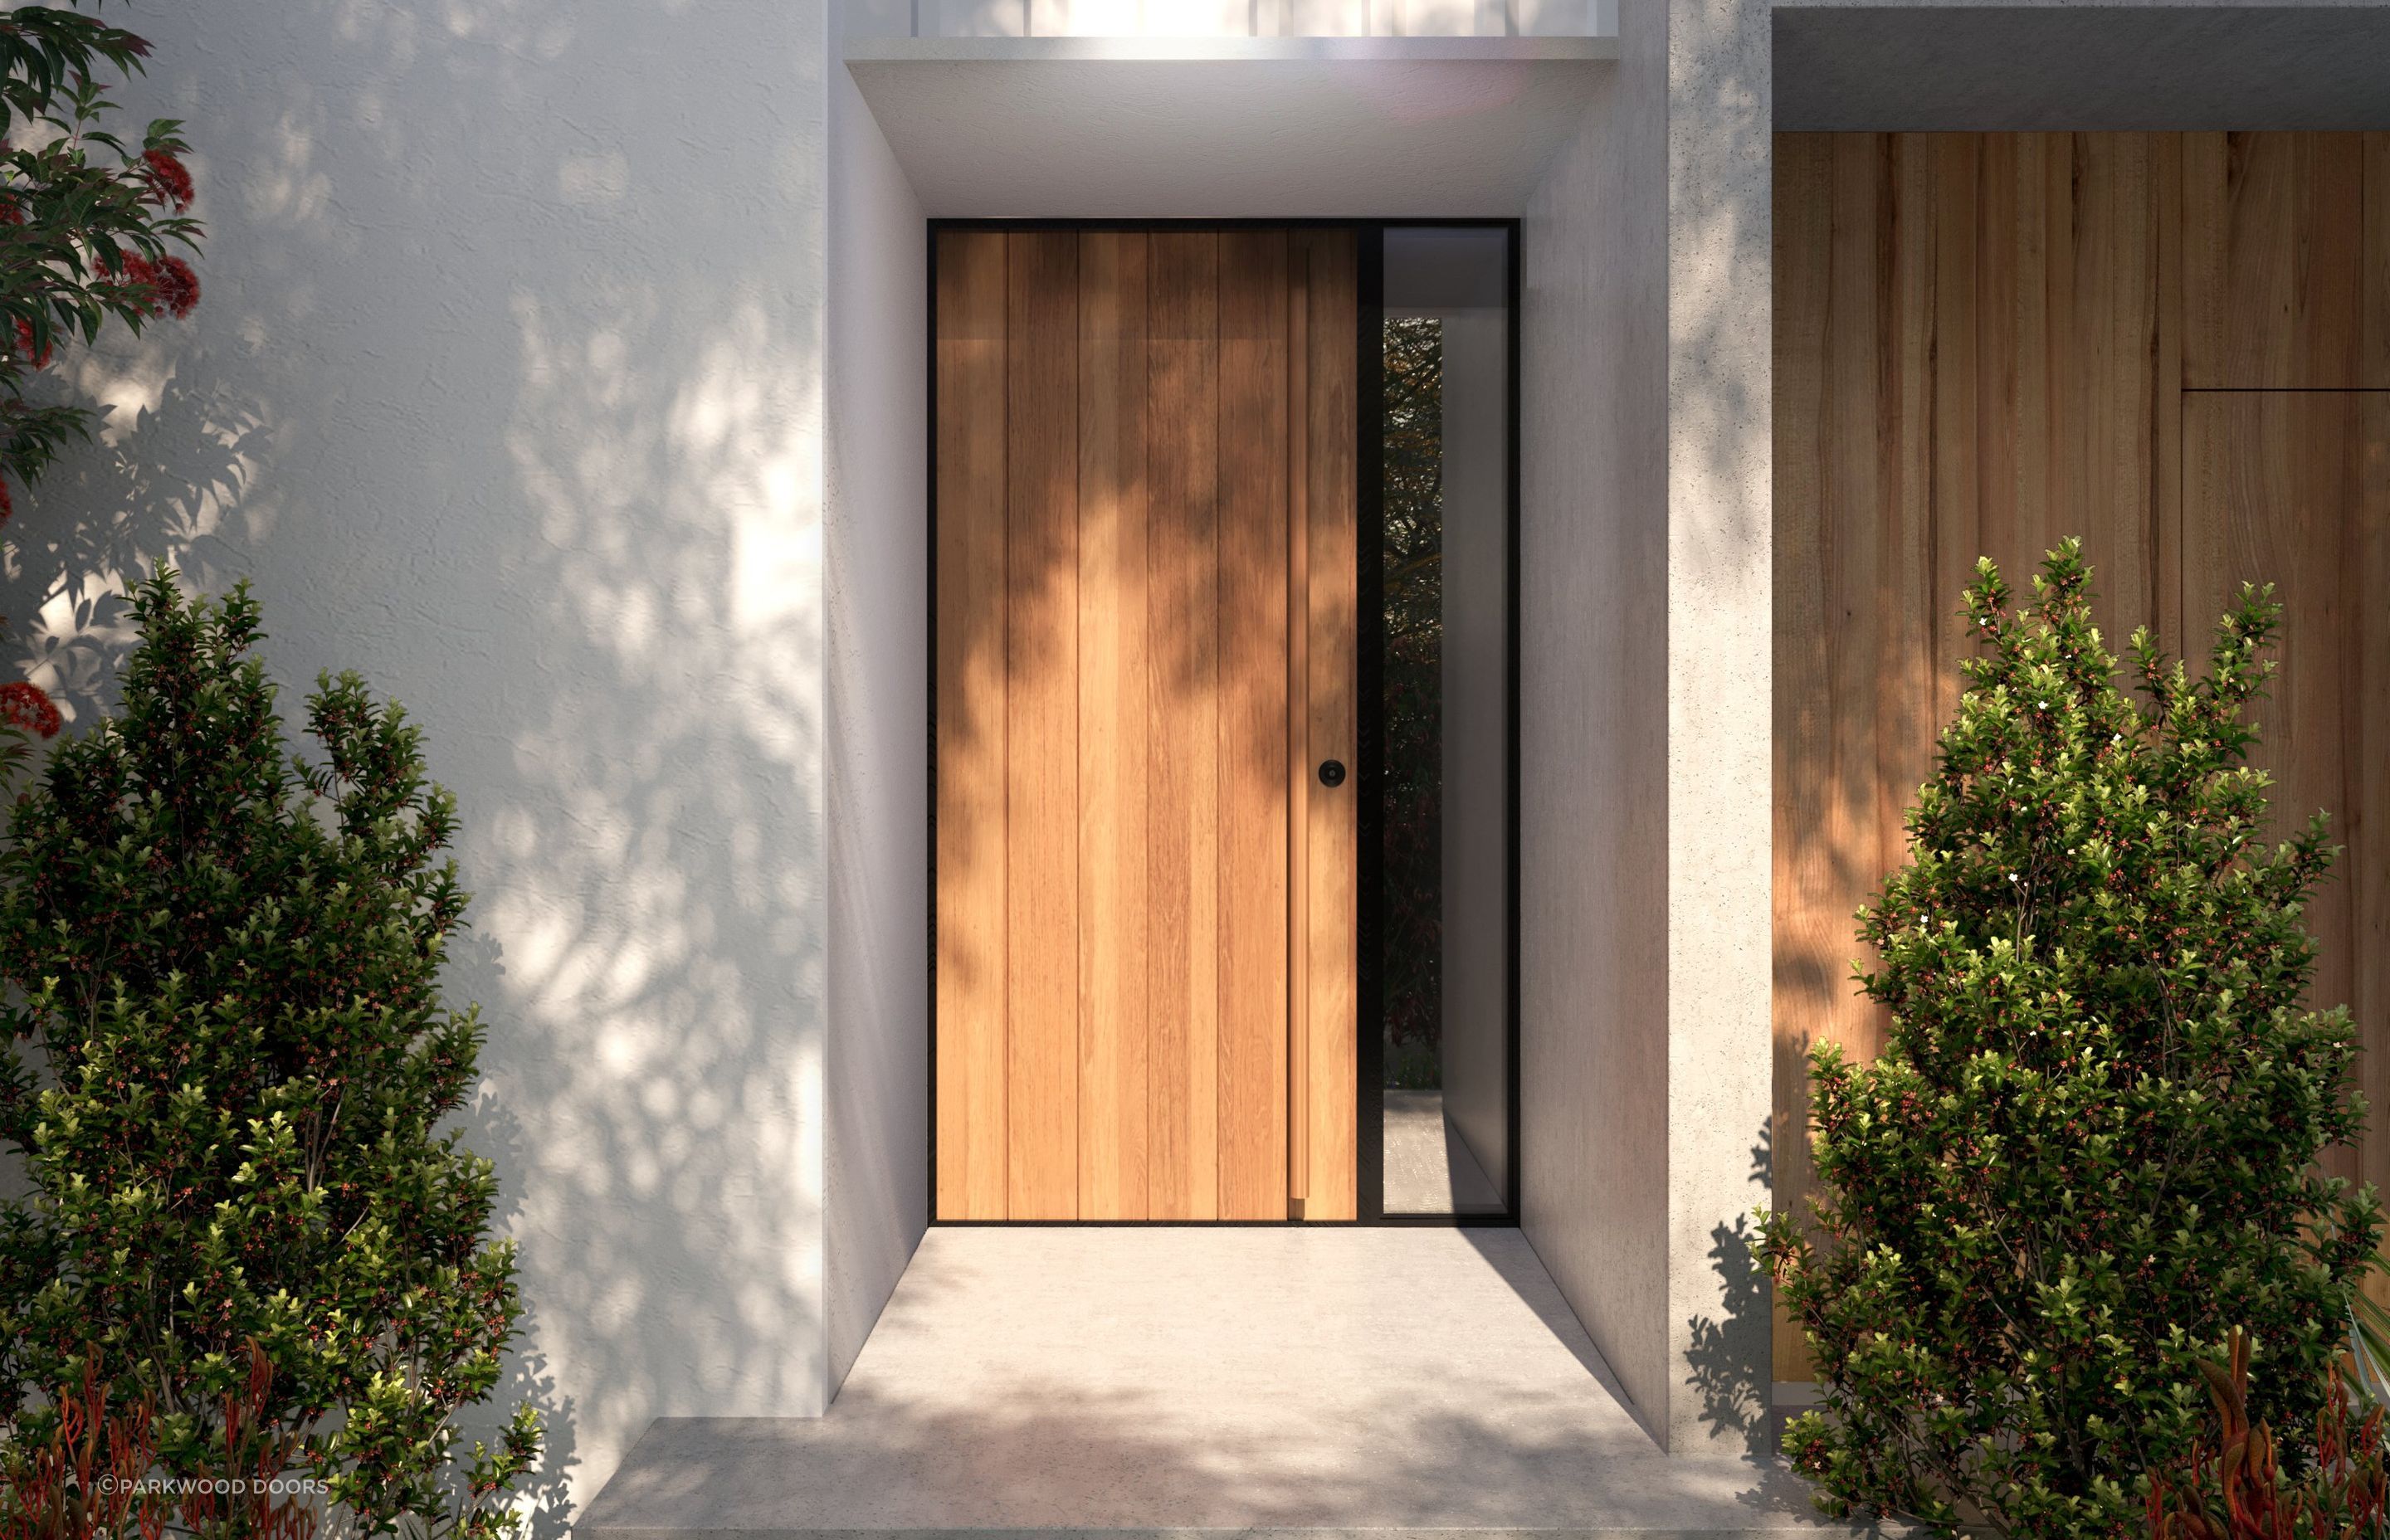 Exterior and interior doors are similar in size.